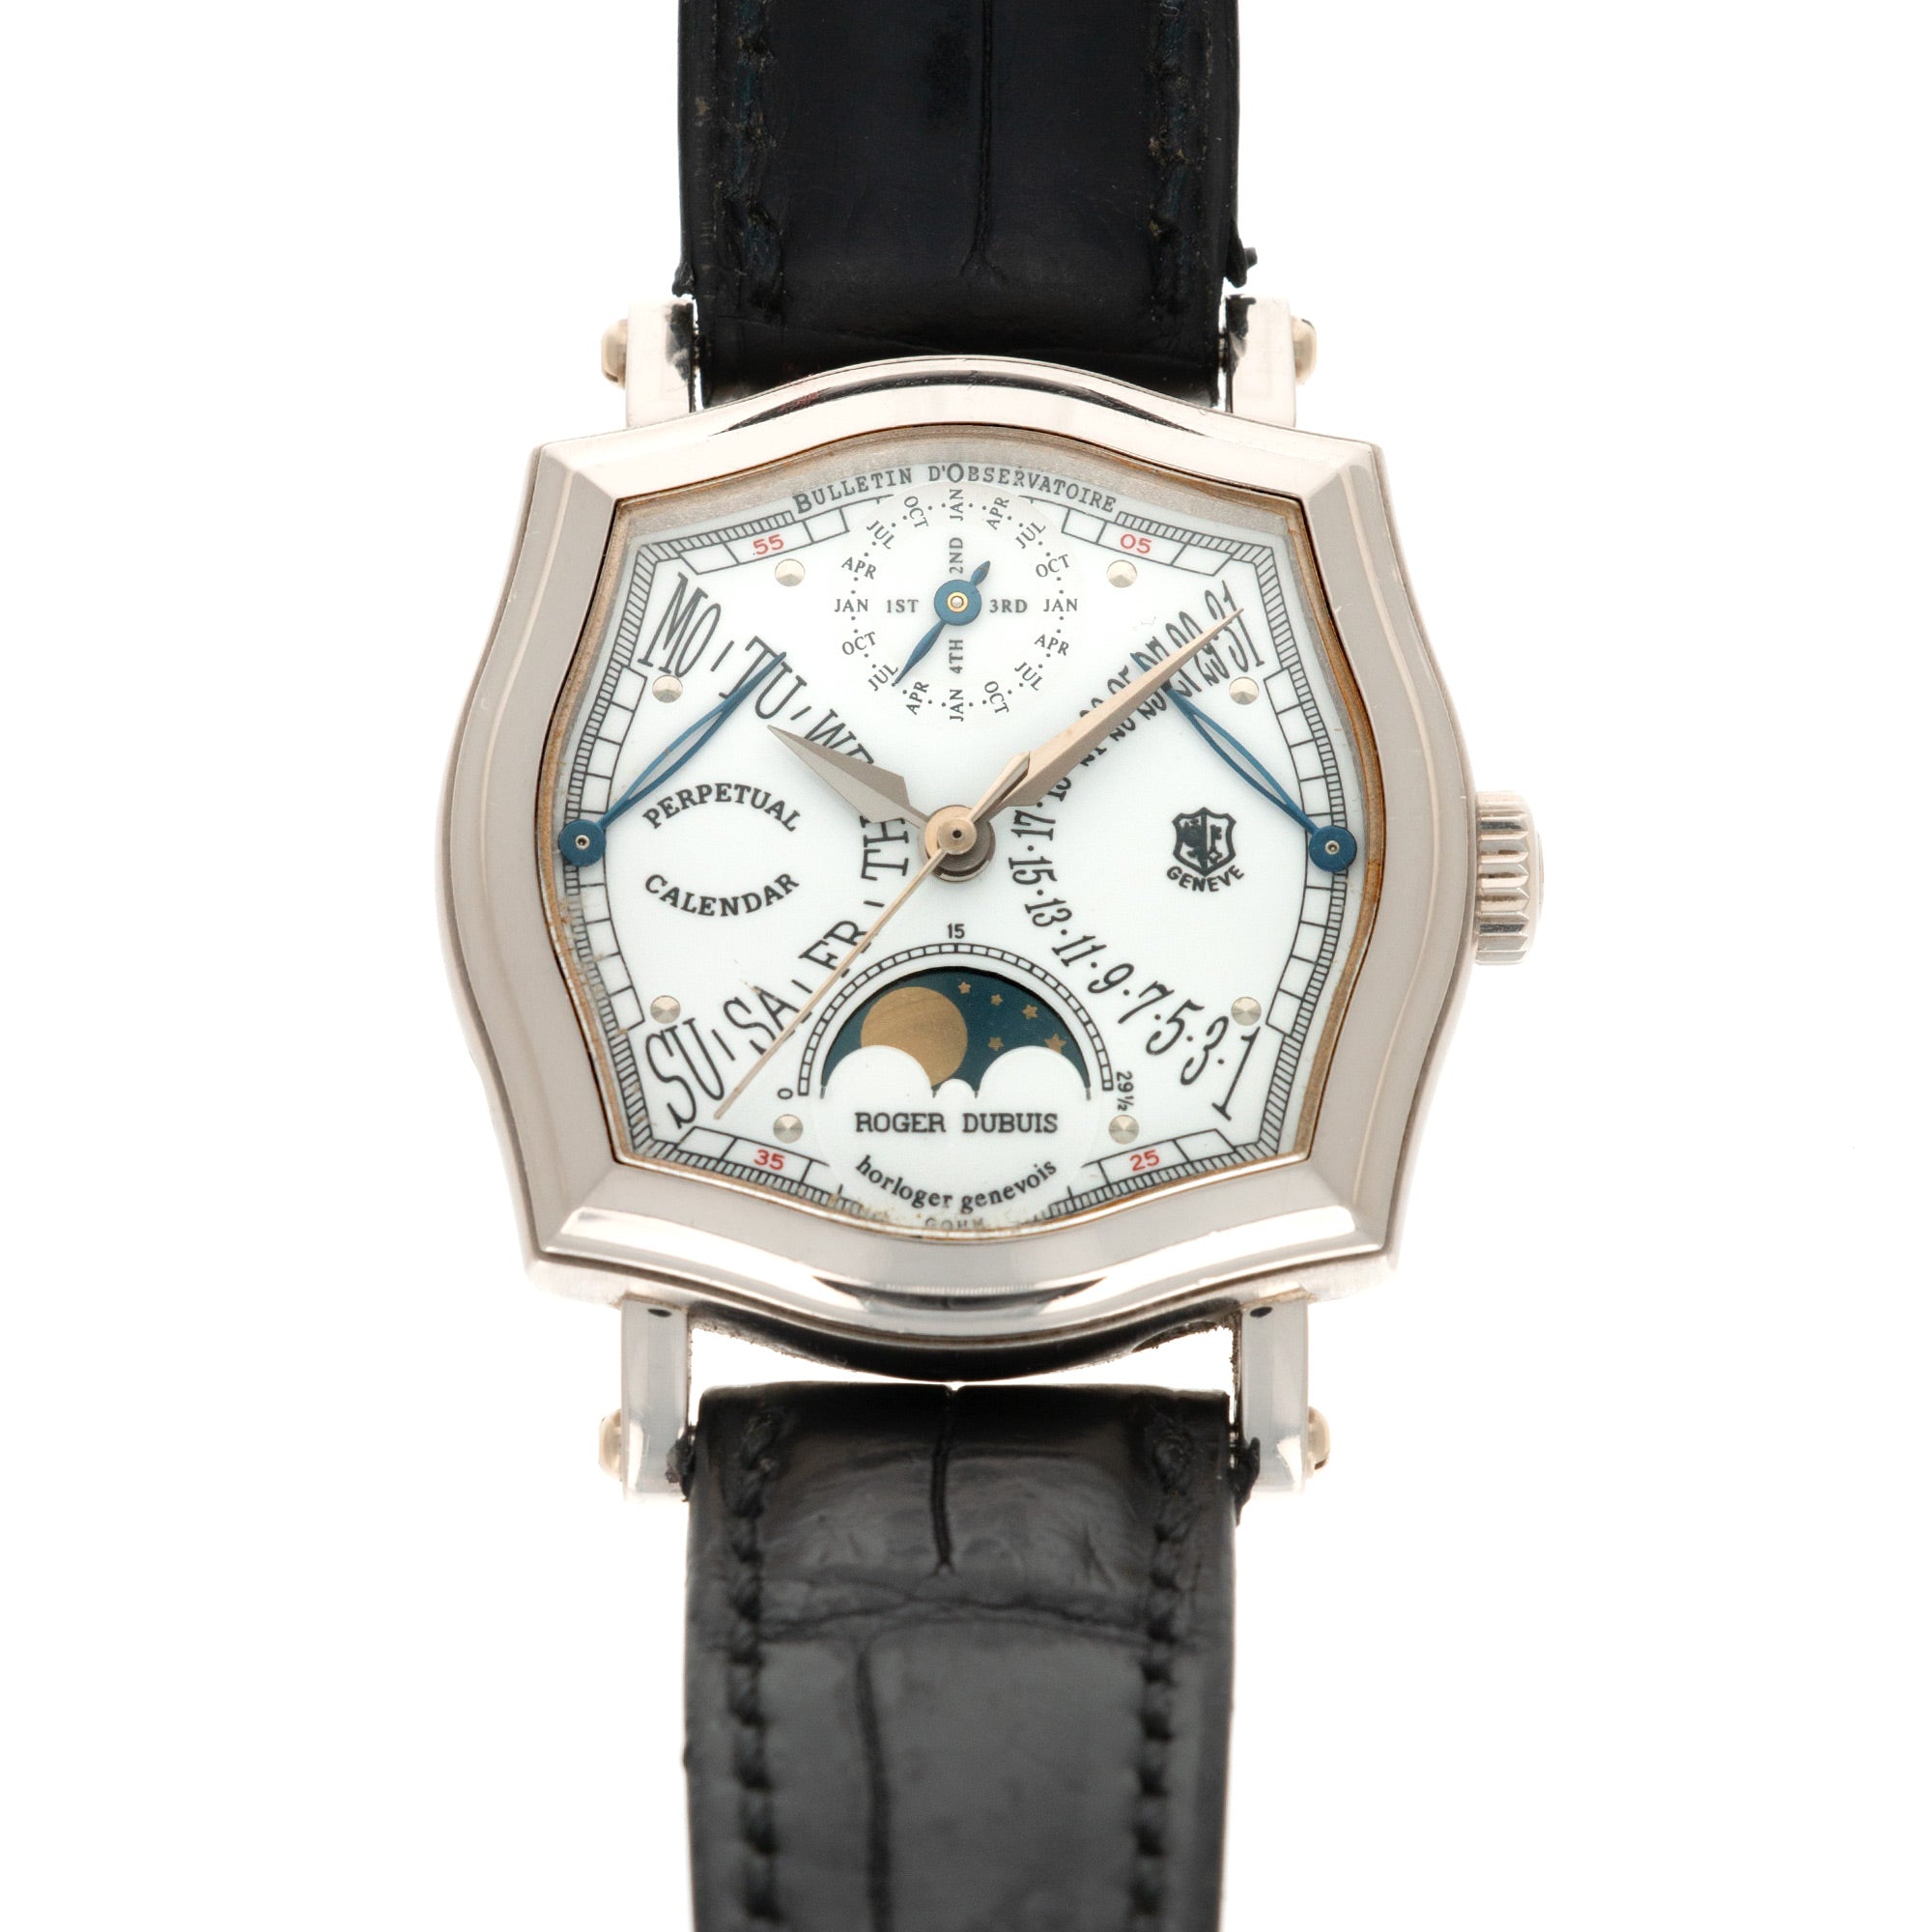 Roger Dubuis - Roger Dubuis White Gold Sympathie Perpetual Calendar Watch - The Keystone Watches